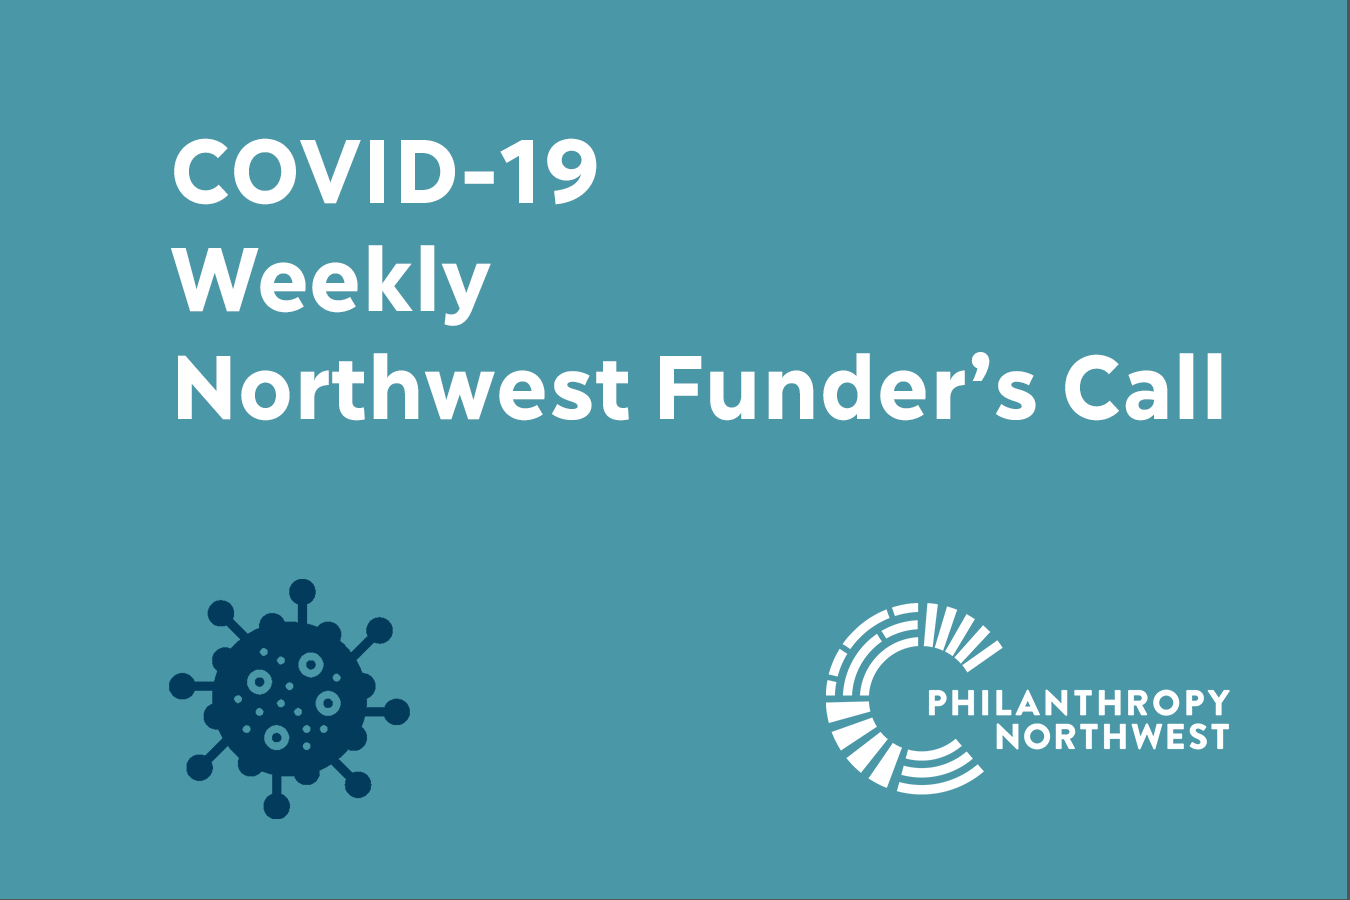 Event Banner for COVID-19 Weekly Northwest Funder's Call with virus icon and Philanthropy Northwest logo